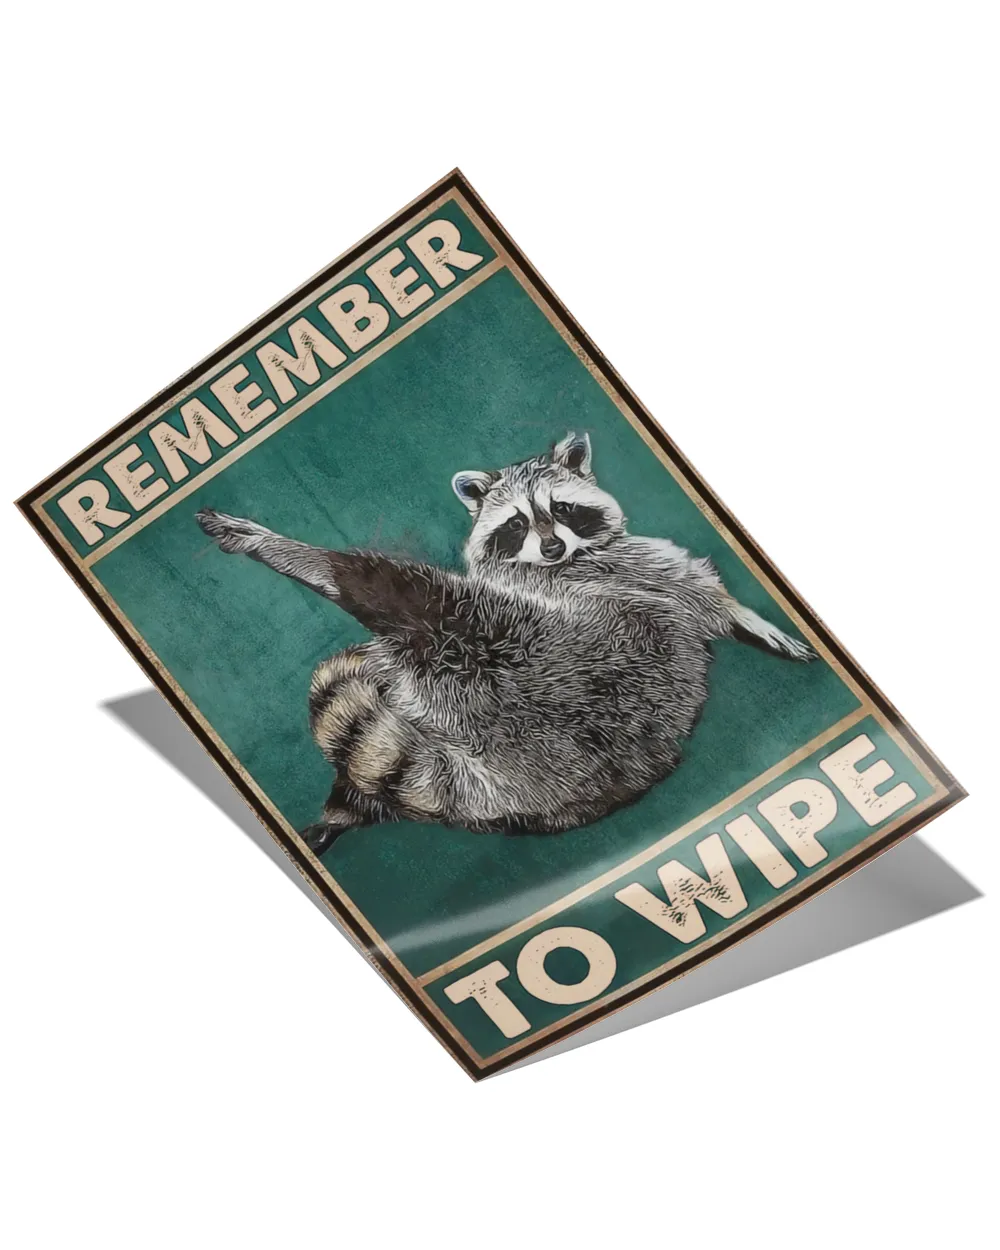 Raccoon Poster- Remember to Wipe